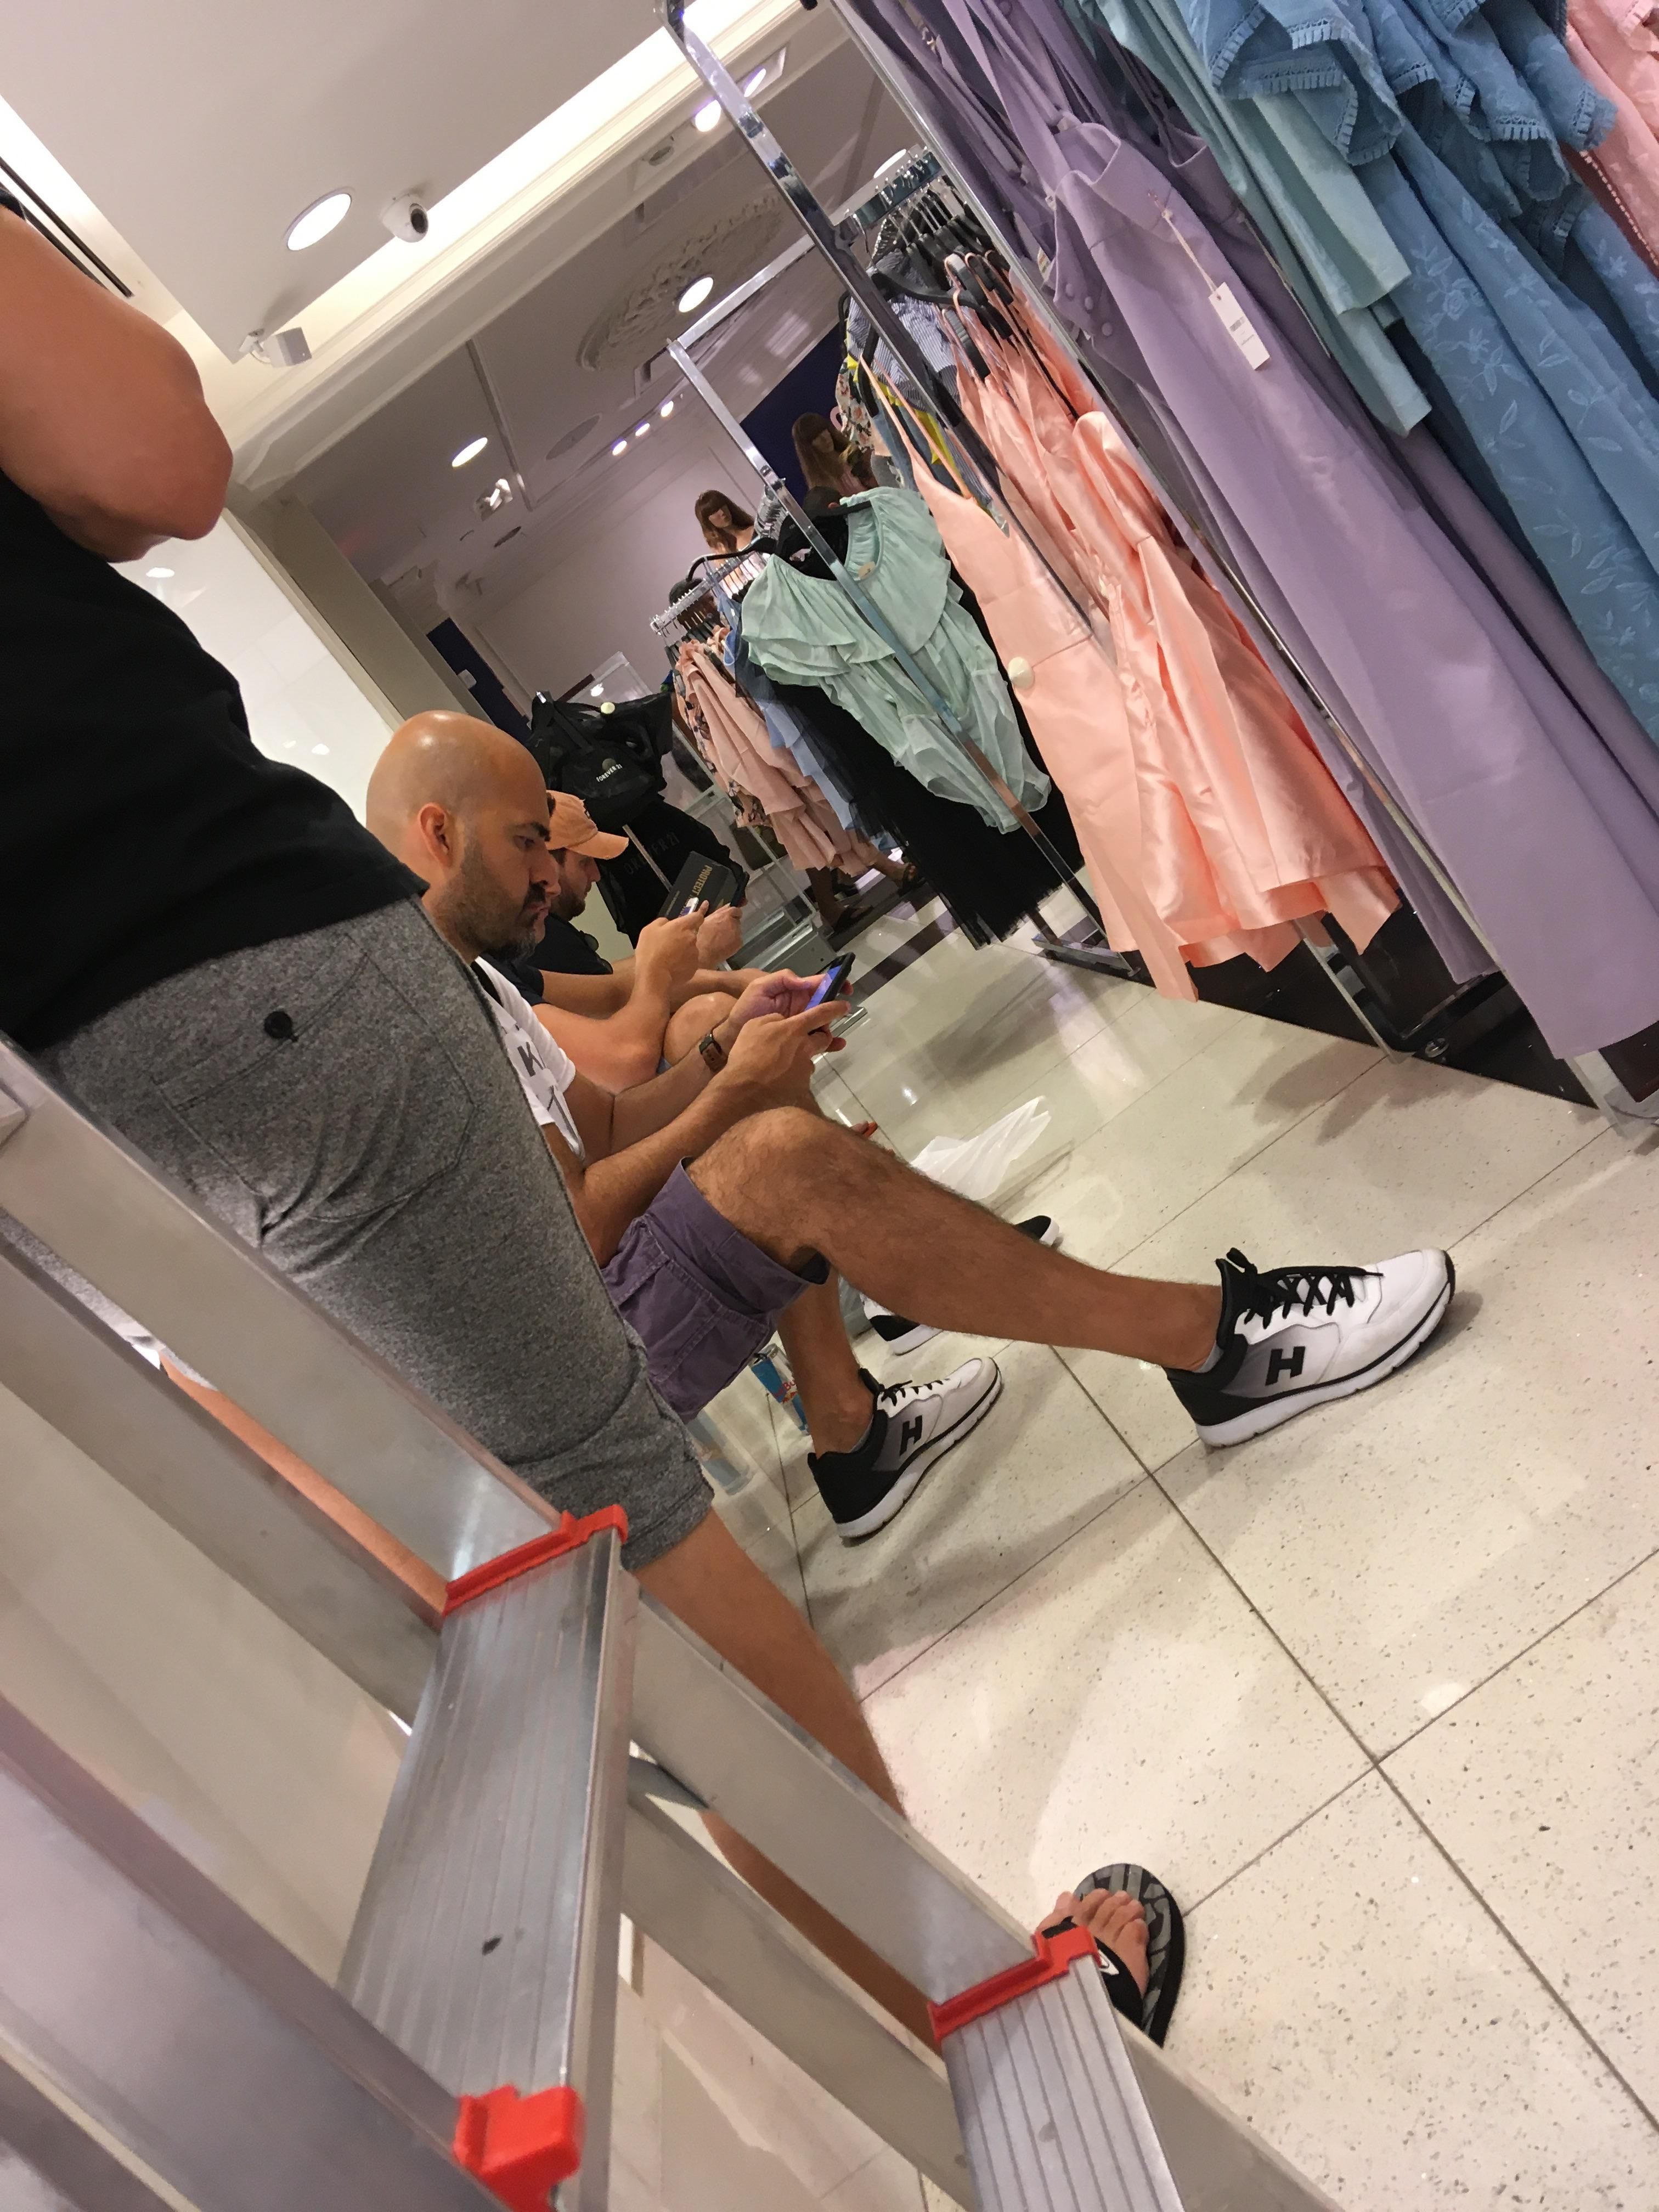 I'm sitting in a forever 21 store with five other men just waiting...